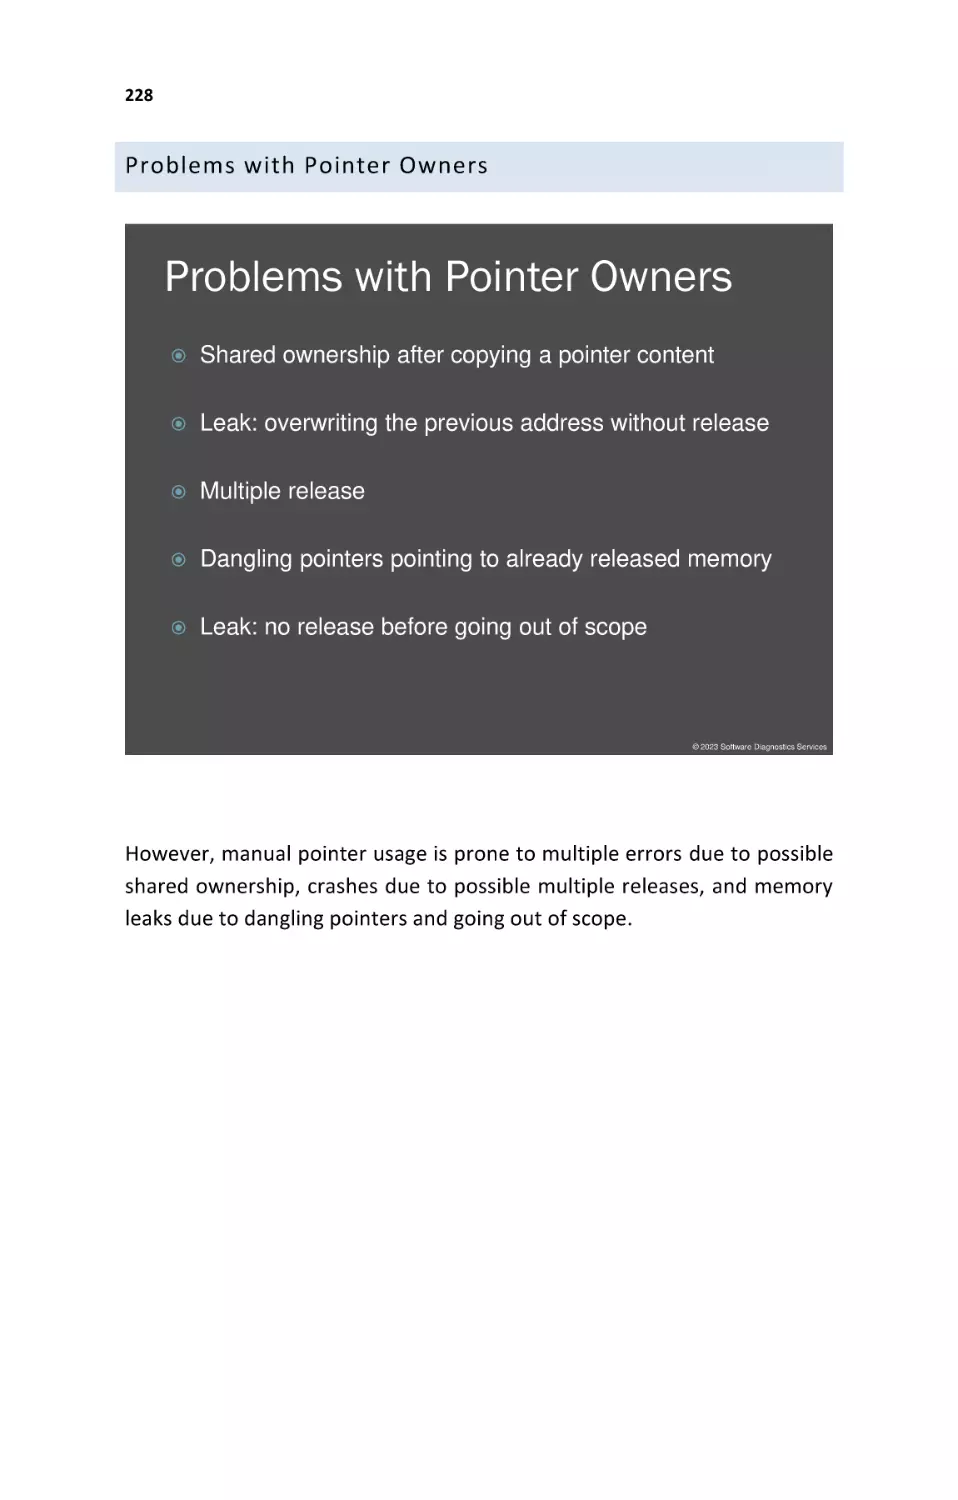 Problems with Pointer Owners